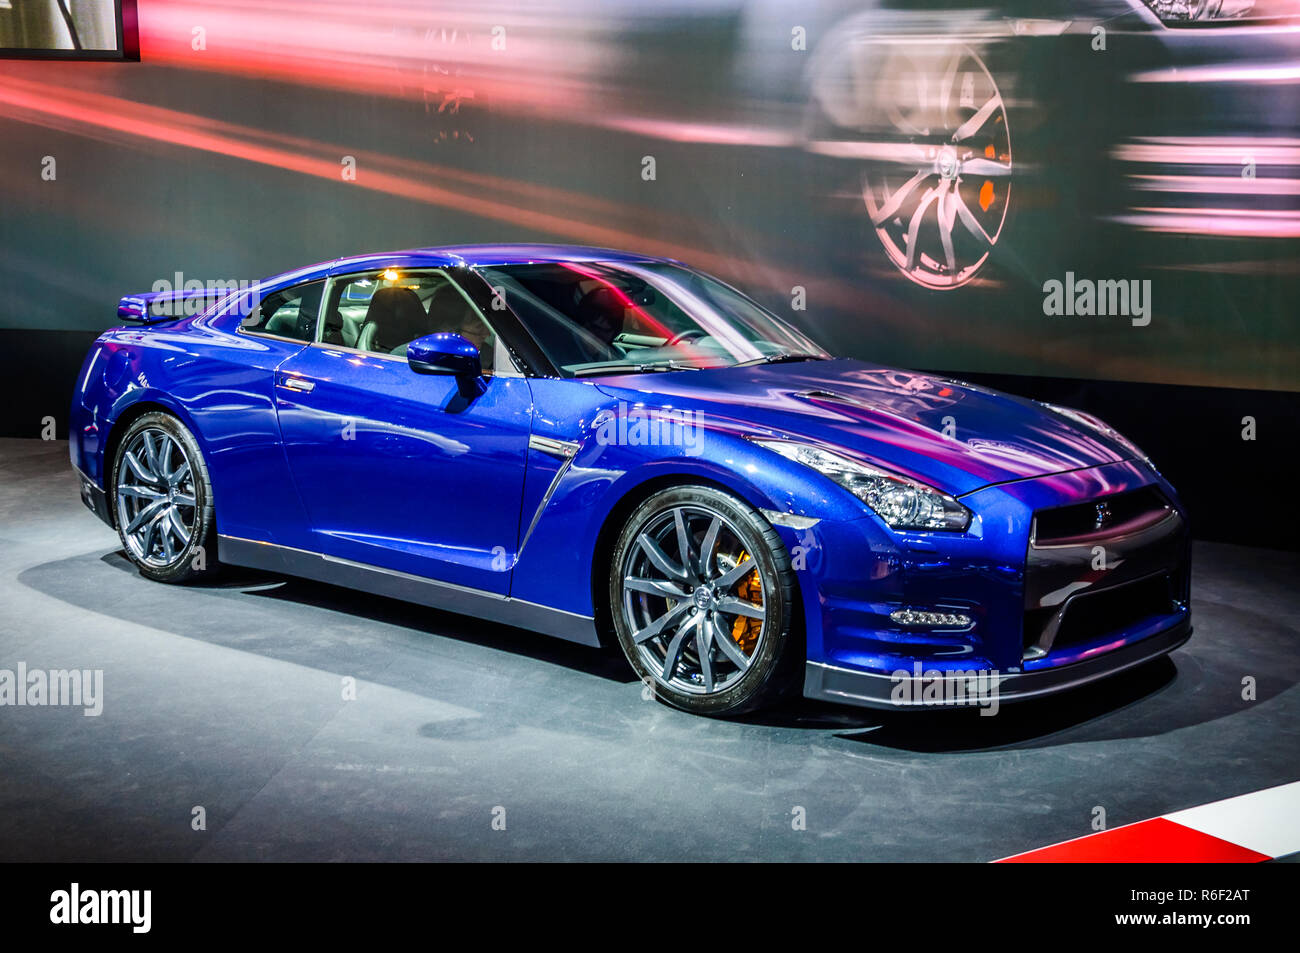 Moscow Russia Aug 12 Nissan Gt R R35 Presented As World Premiere At The 16th Mias Moscow International Automobile Salon On August 30 12 In Stock Photo Alamy